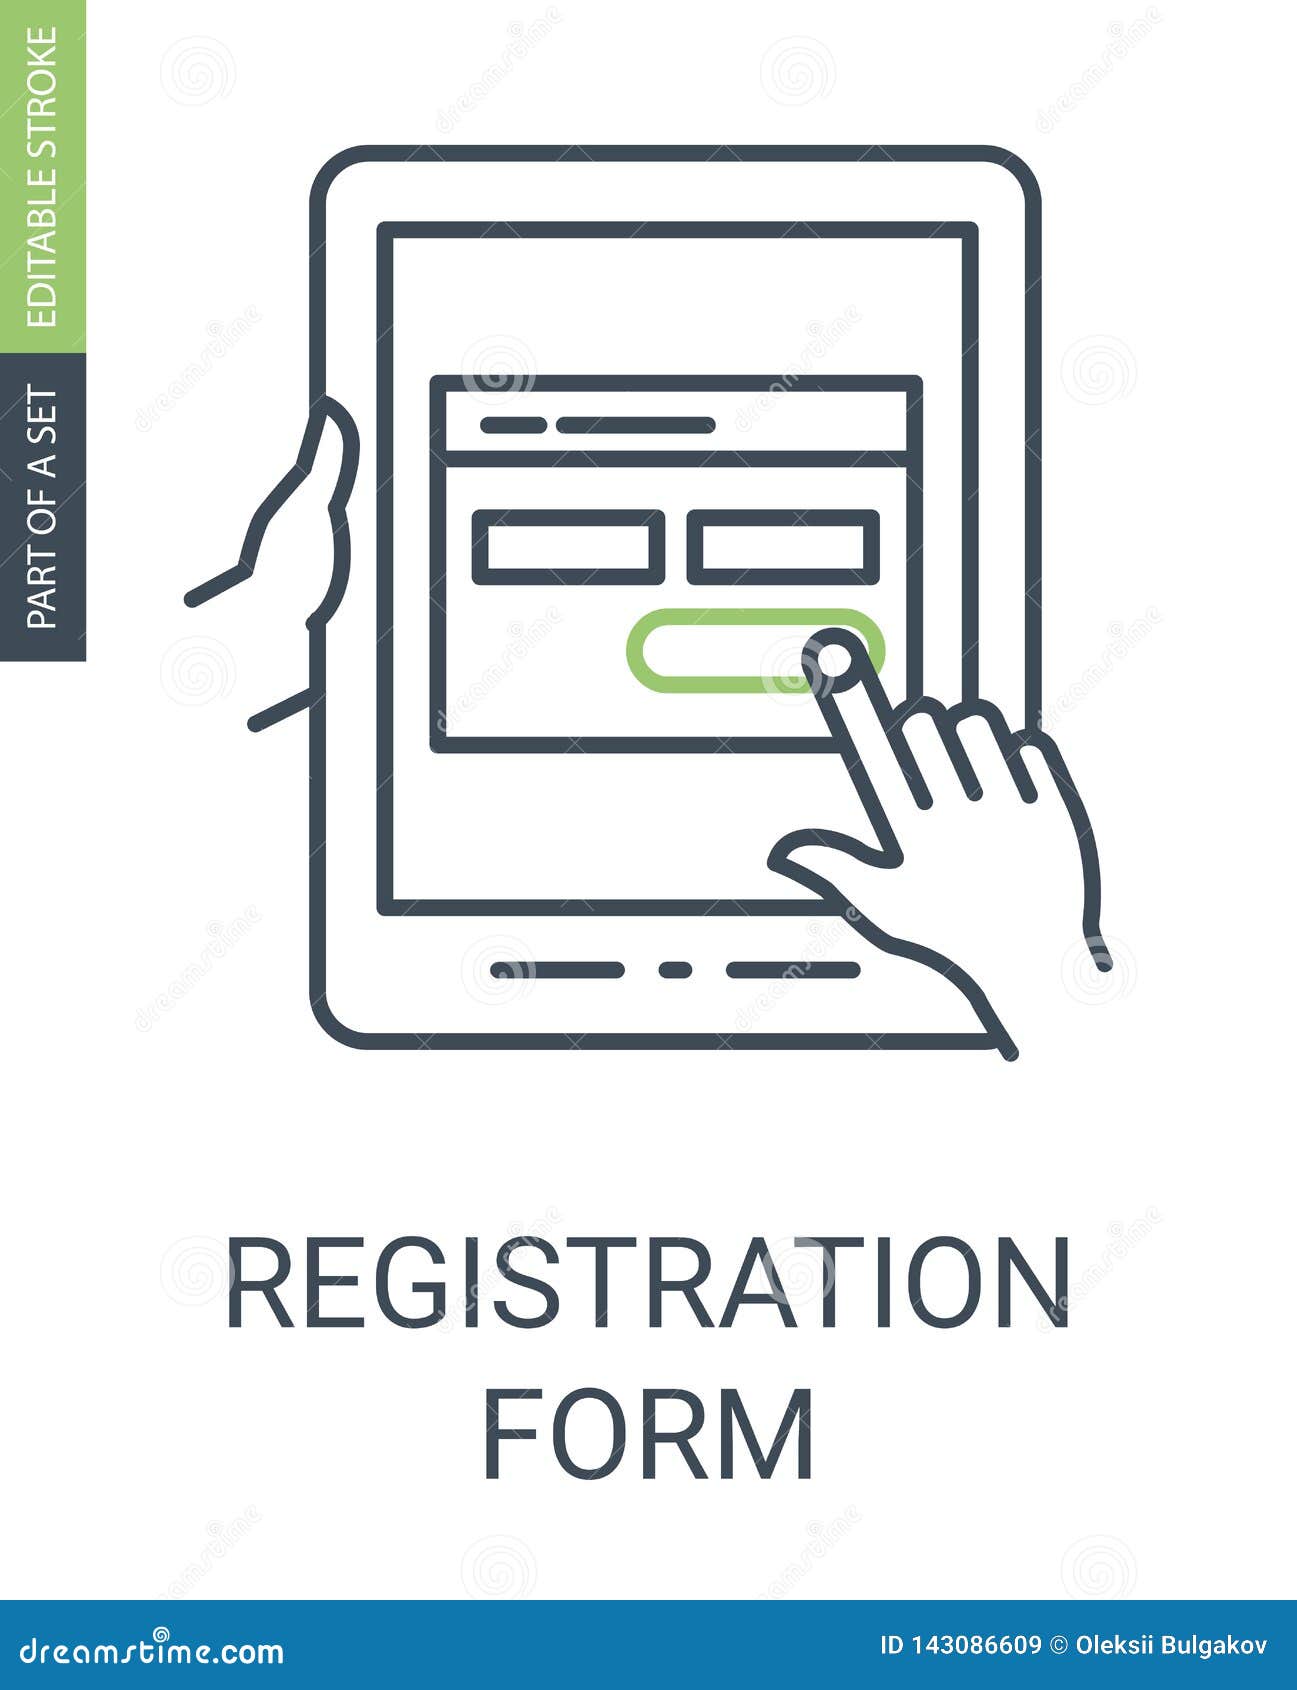 registration form icon with outline style and editable stroke